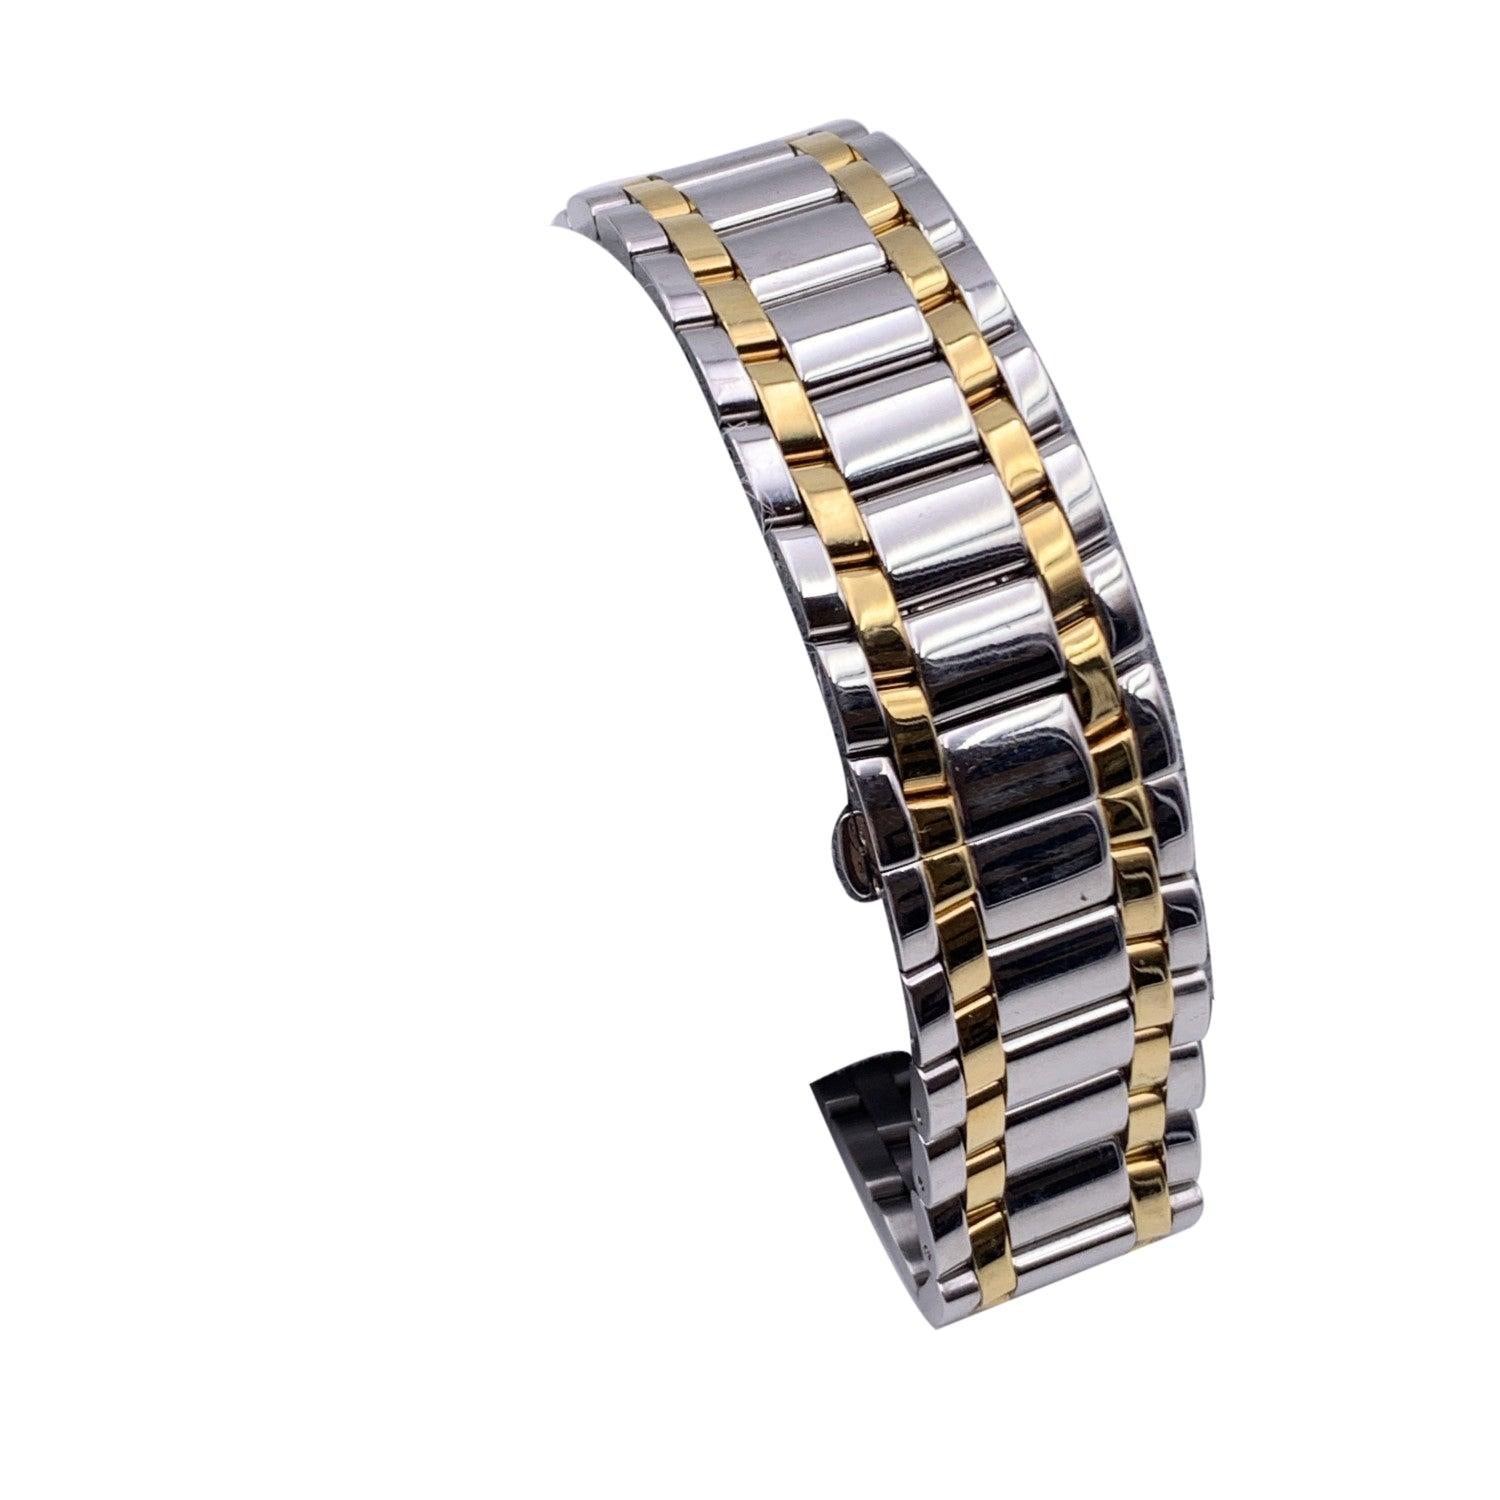 Fendi gold-tone and silver-tone stainless steel watch, Mod. 7000 G. Rectangle stainless steel case. Gold dial with numbers and two hands. Sapphire crystal. Swiss Made Quartz movement. Second dial at 6 o' clock. Fendi written on face. Gold-tone and